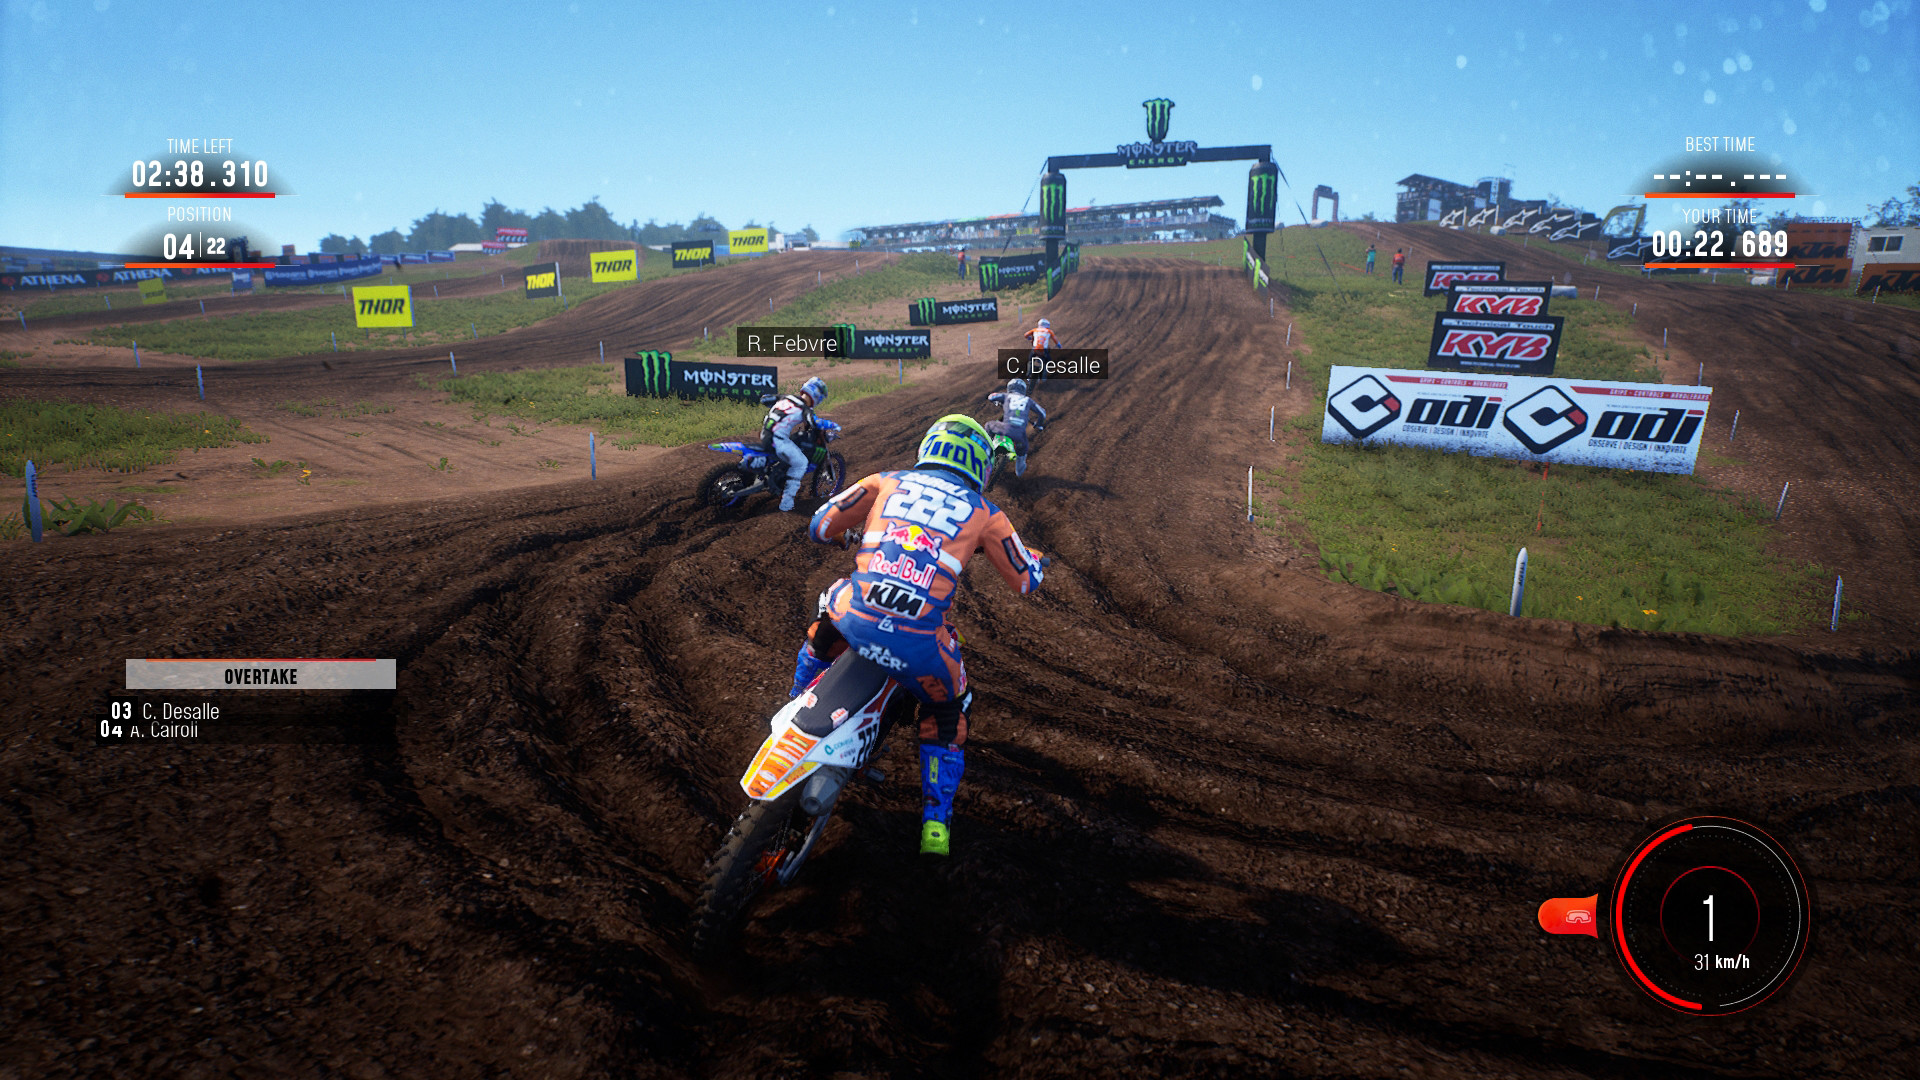 Find the best laptops for MXGP 2019 - The Official Motocross Videogame